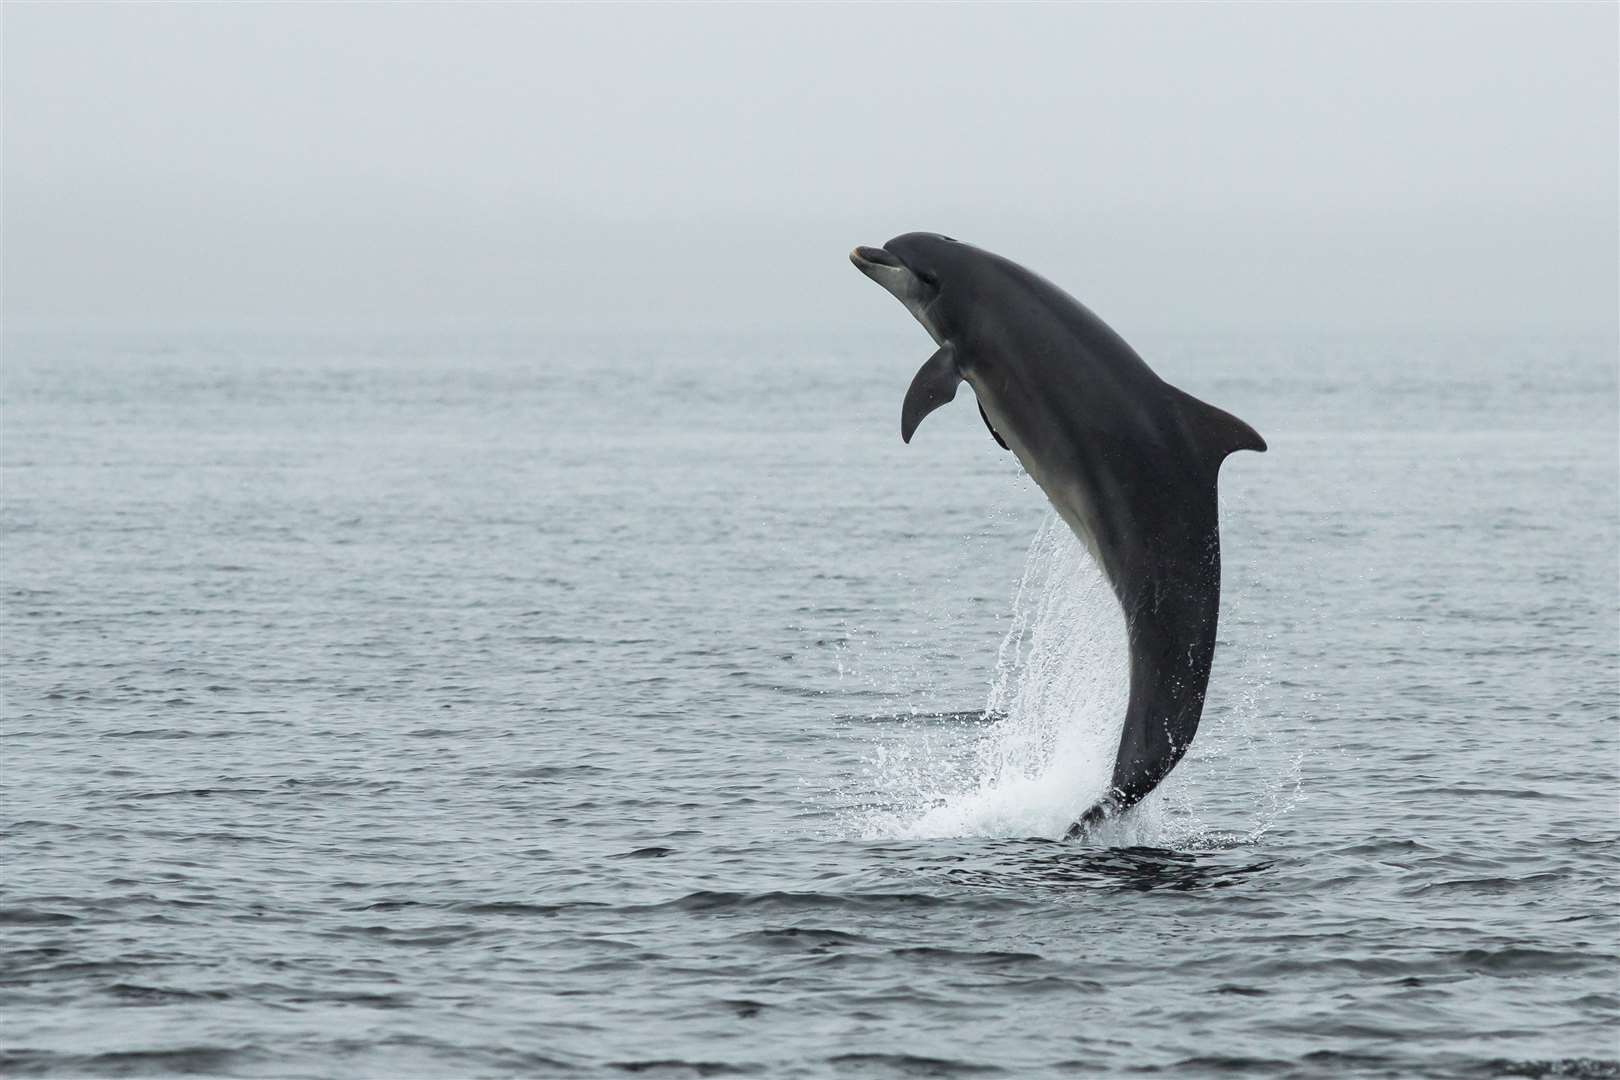 Developers behind a proposed marina on the Moray Firth say a sea ranger would stress the importance of careful boating around dolphins.